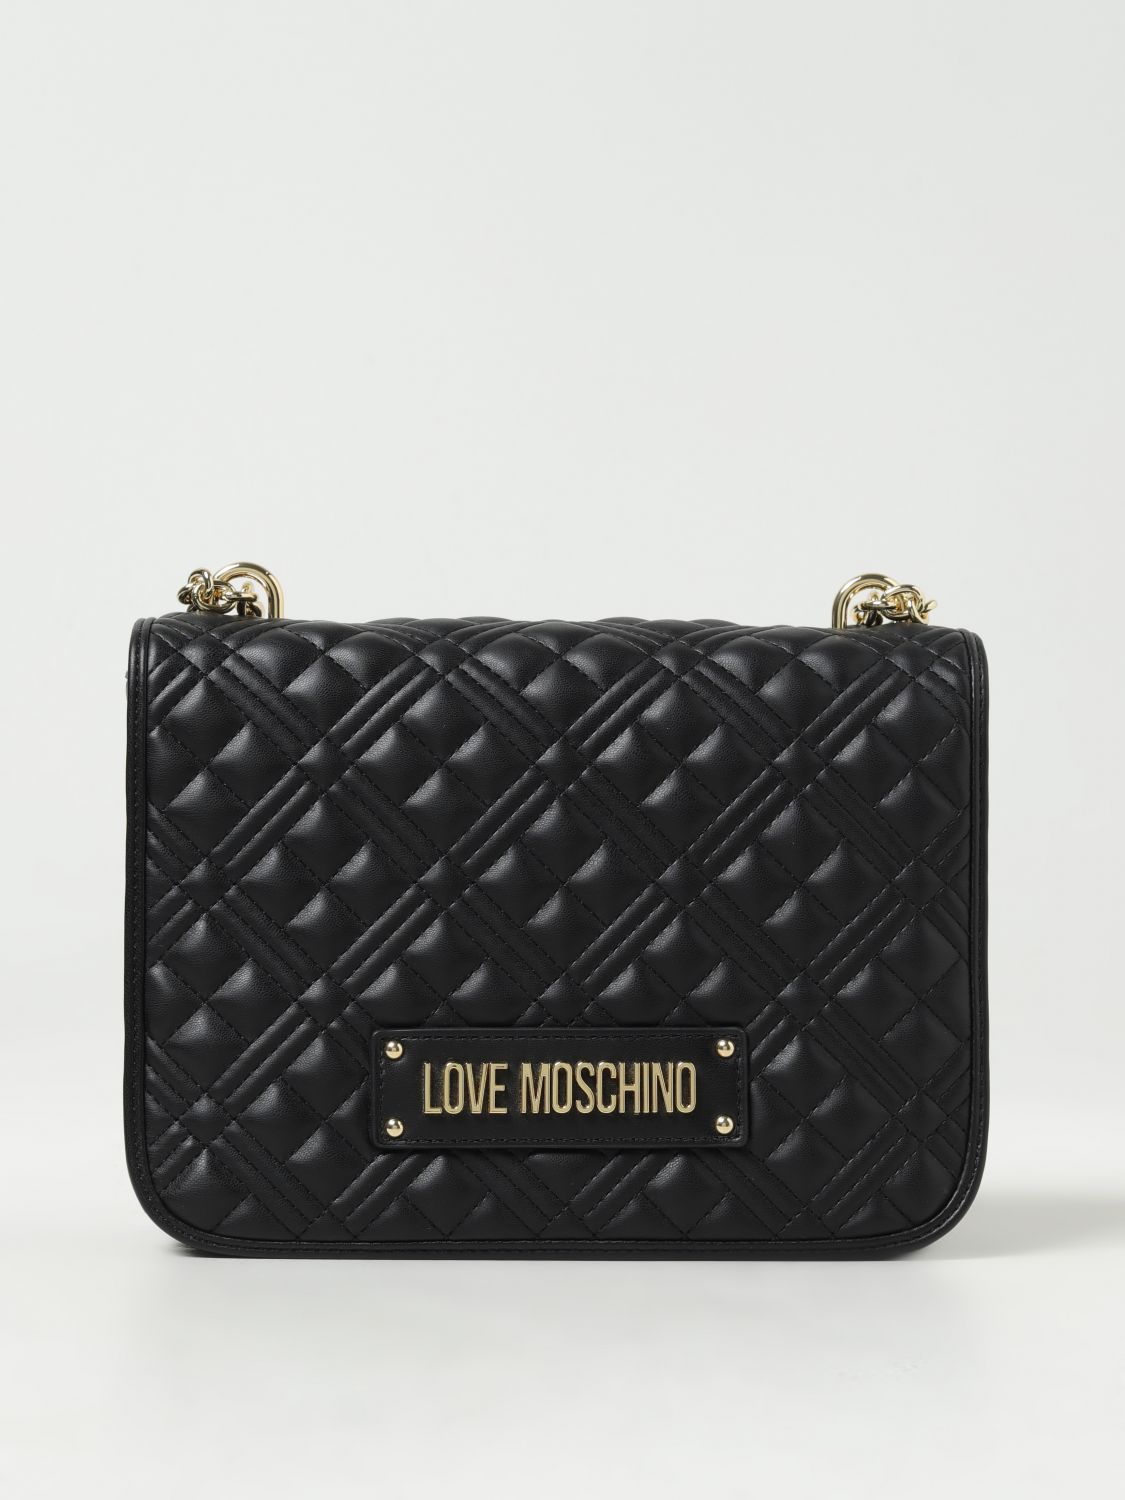 LOVE MOSCHINO BAG IN QUILTED SYNTHETIC LEATHER,F11635002